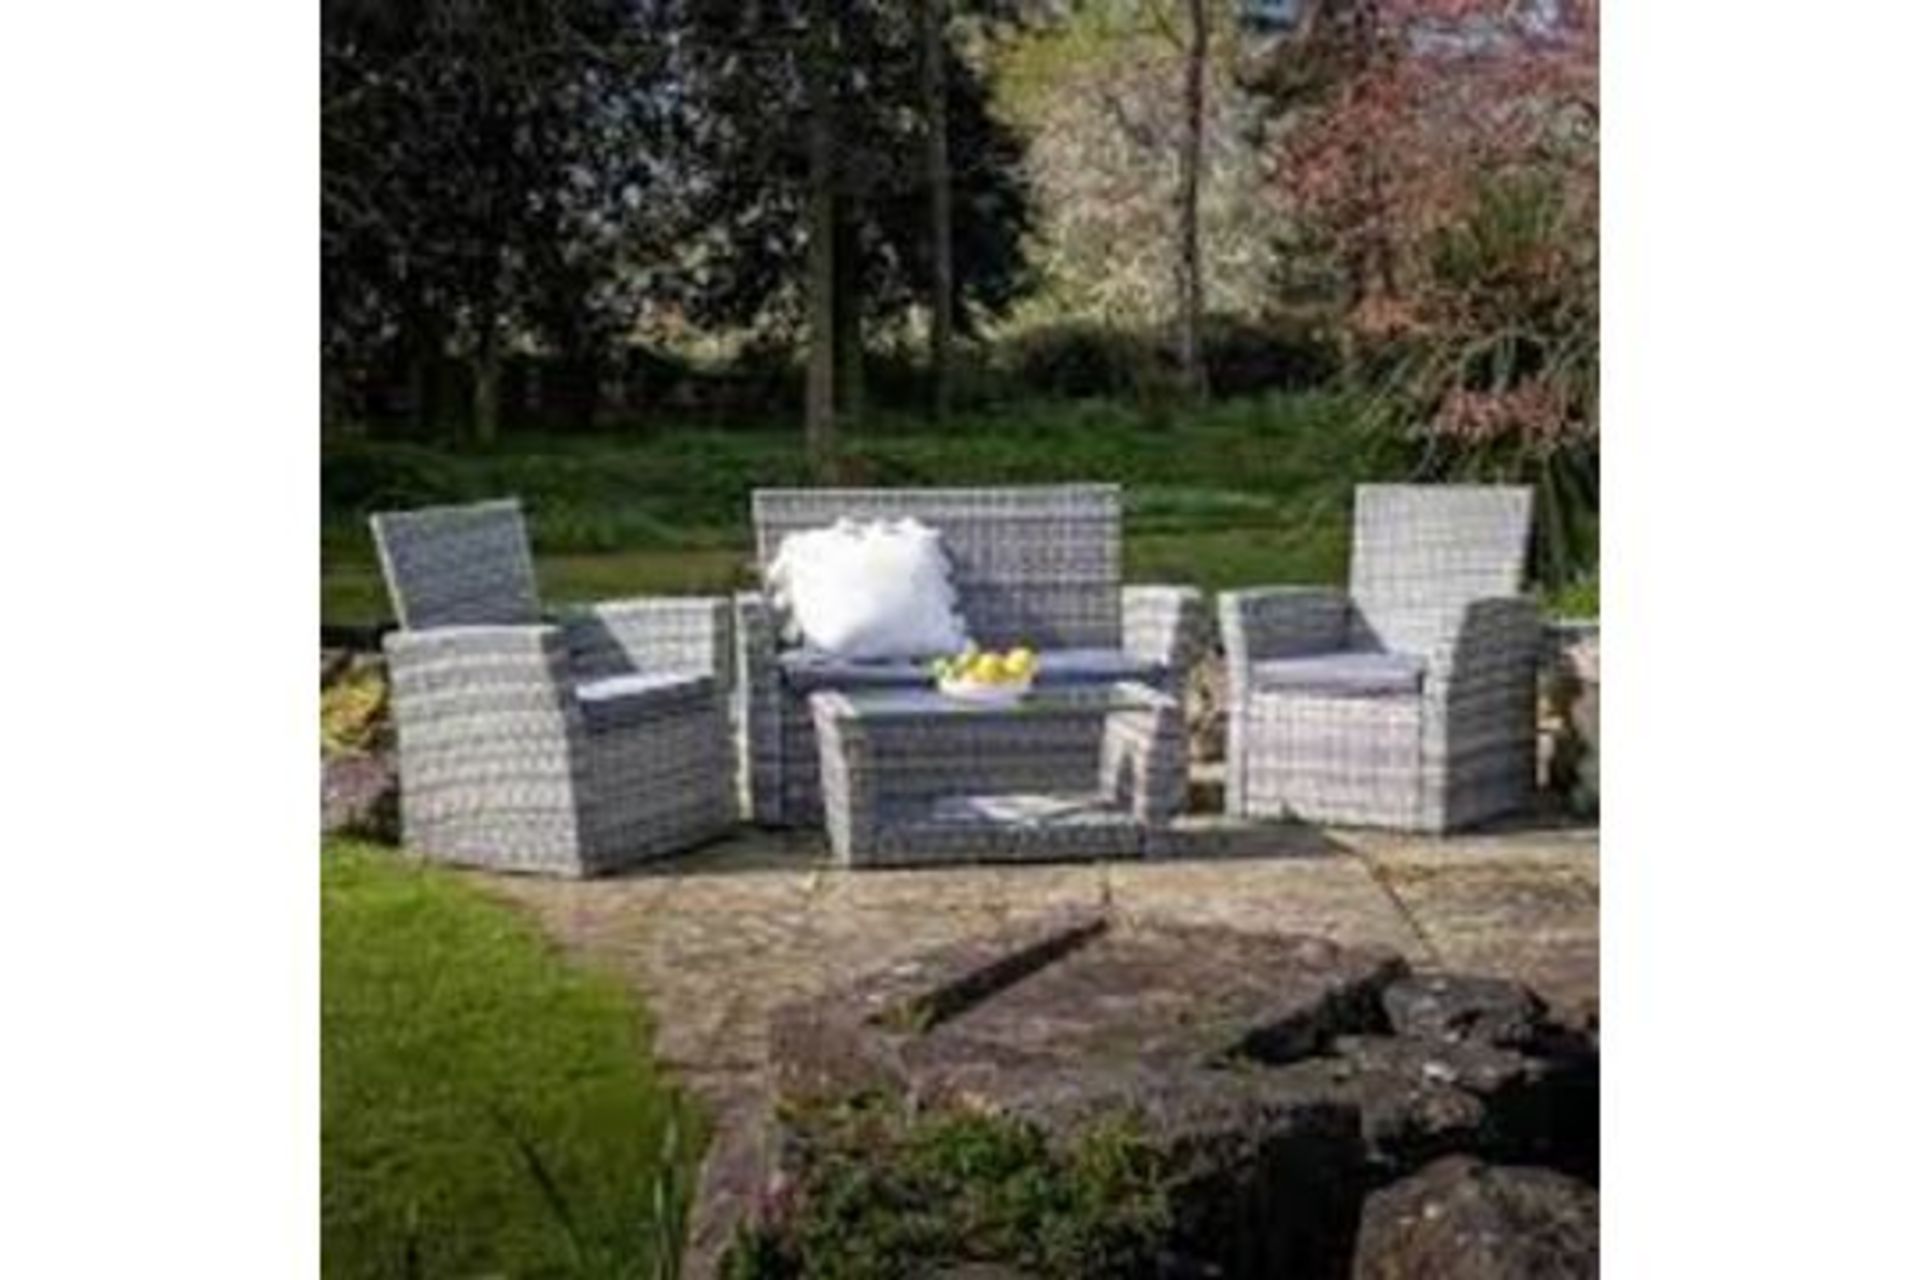 TRADE LOT 4 X New Boxed Corfo 4 Seater Garden Furniture Set in Grey. The 4-piece garden furniture